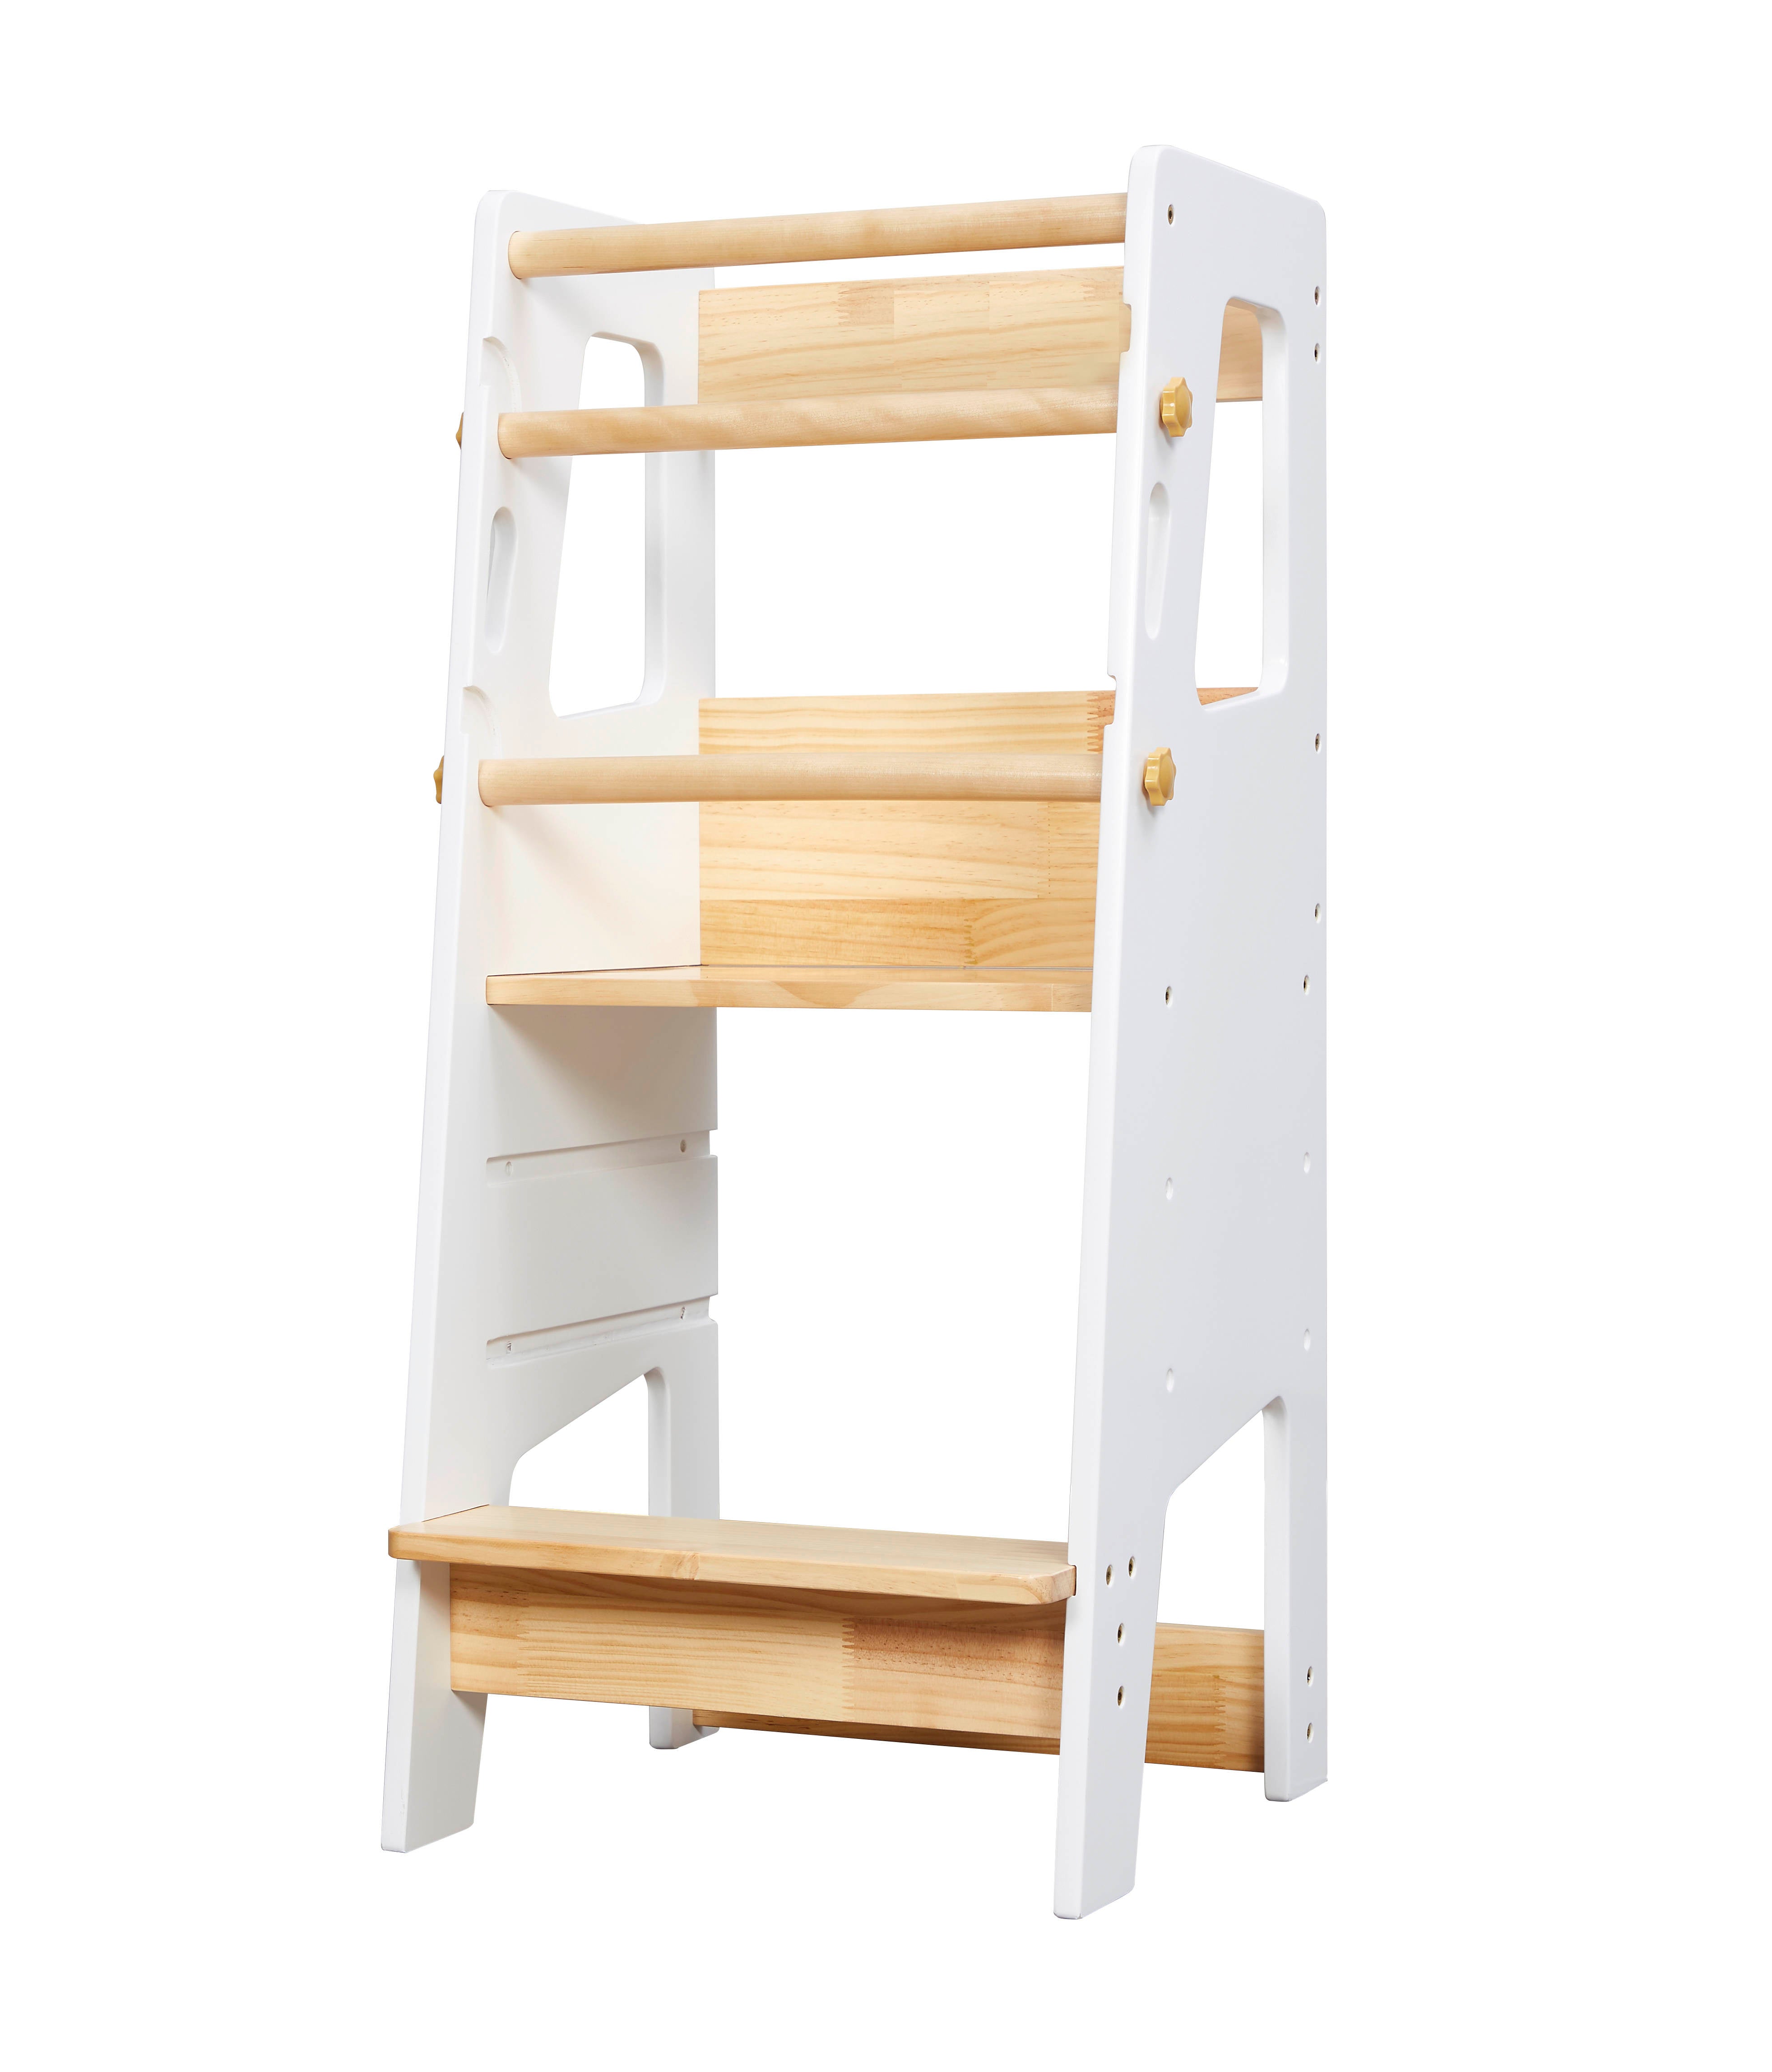 Toddler Learning Tower, Montessori Inspired Learning, Kitchen Helper Tower